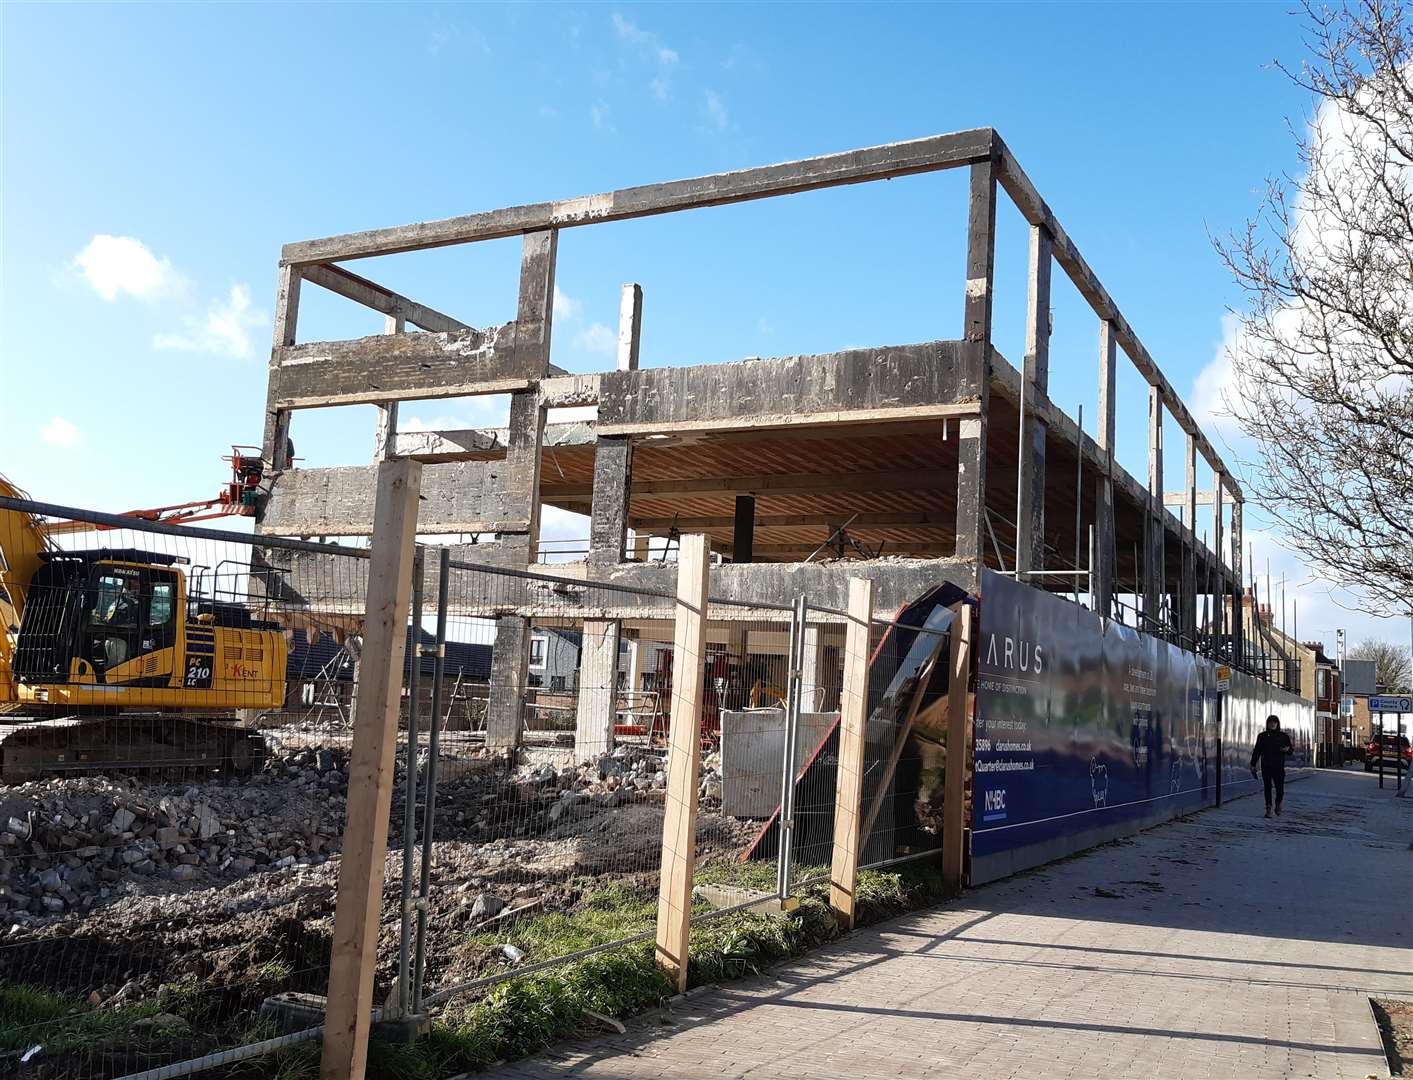 Contractors have started work on the former Fabric Warehouse building